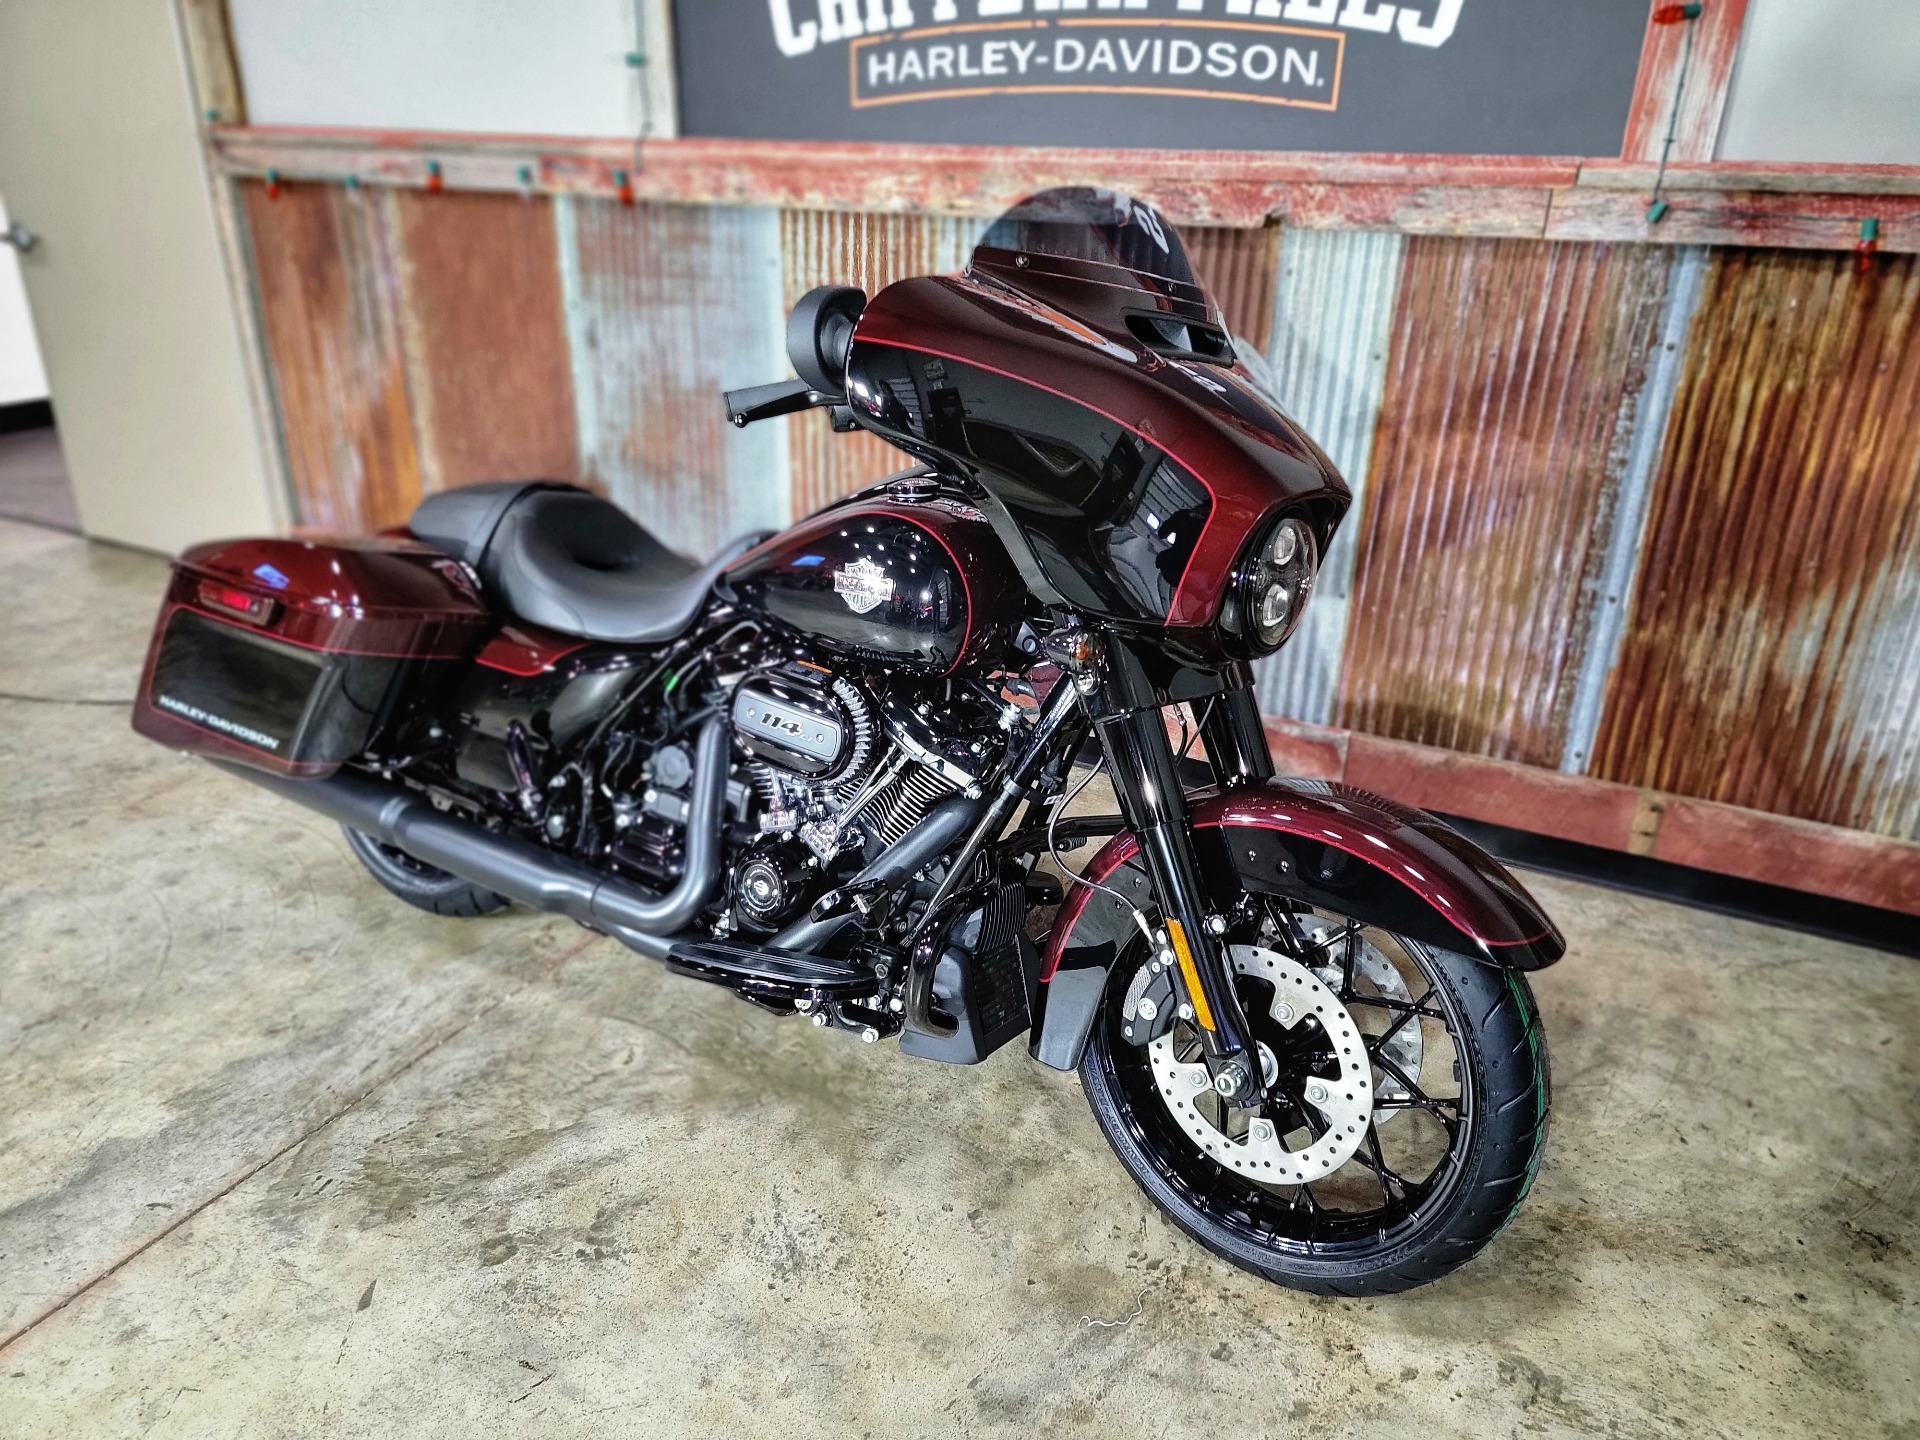 2022 Harley-Davidson Street Glide® Special in Chippewa Falls, Wisconsin - Photo 5